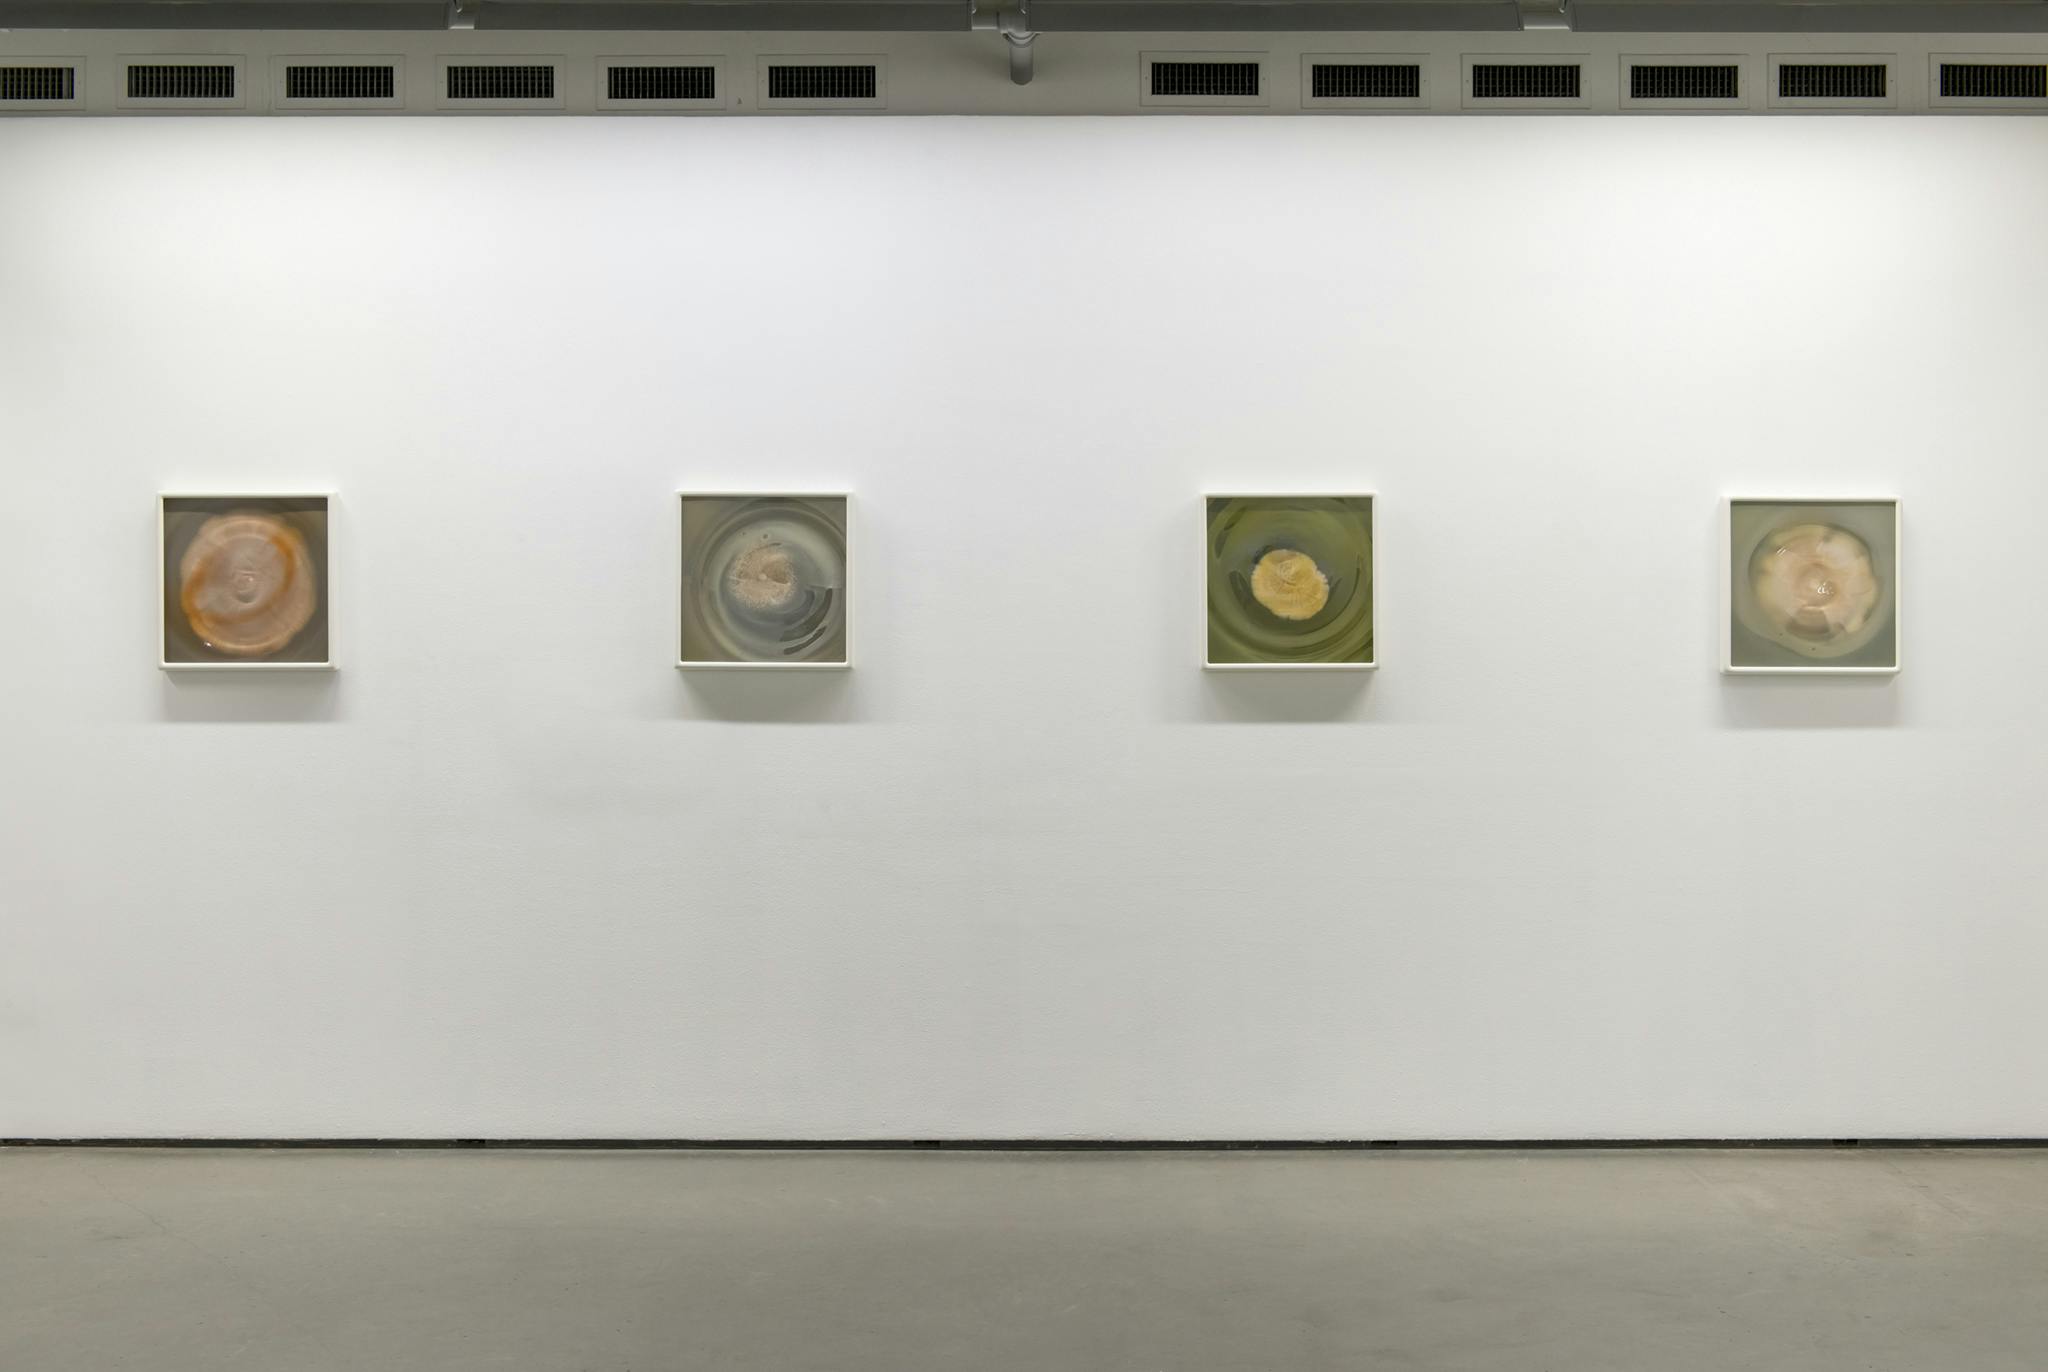 Four framed photographs hang on the wall of a gallery space. The photographs show fungi at a particular point in their development. Each image varies in hues of green, orange, beige and blue.